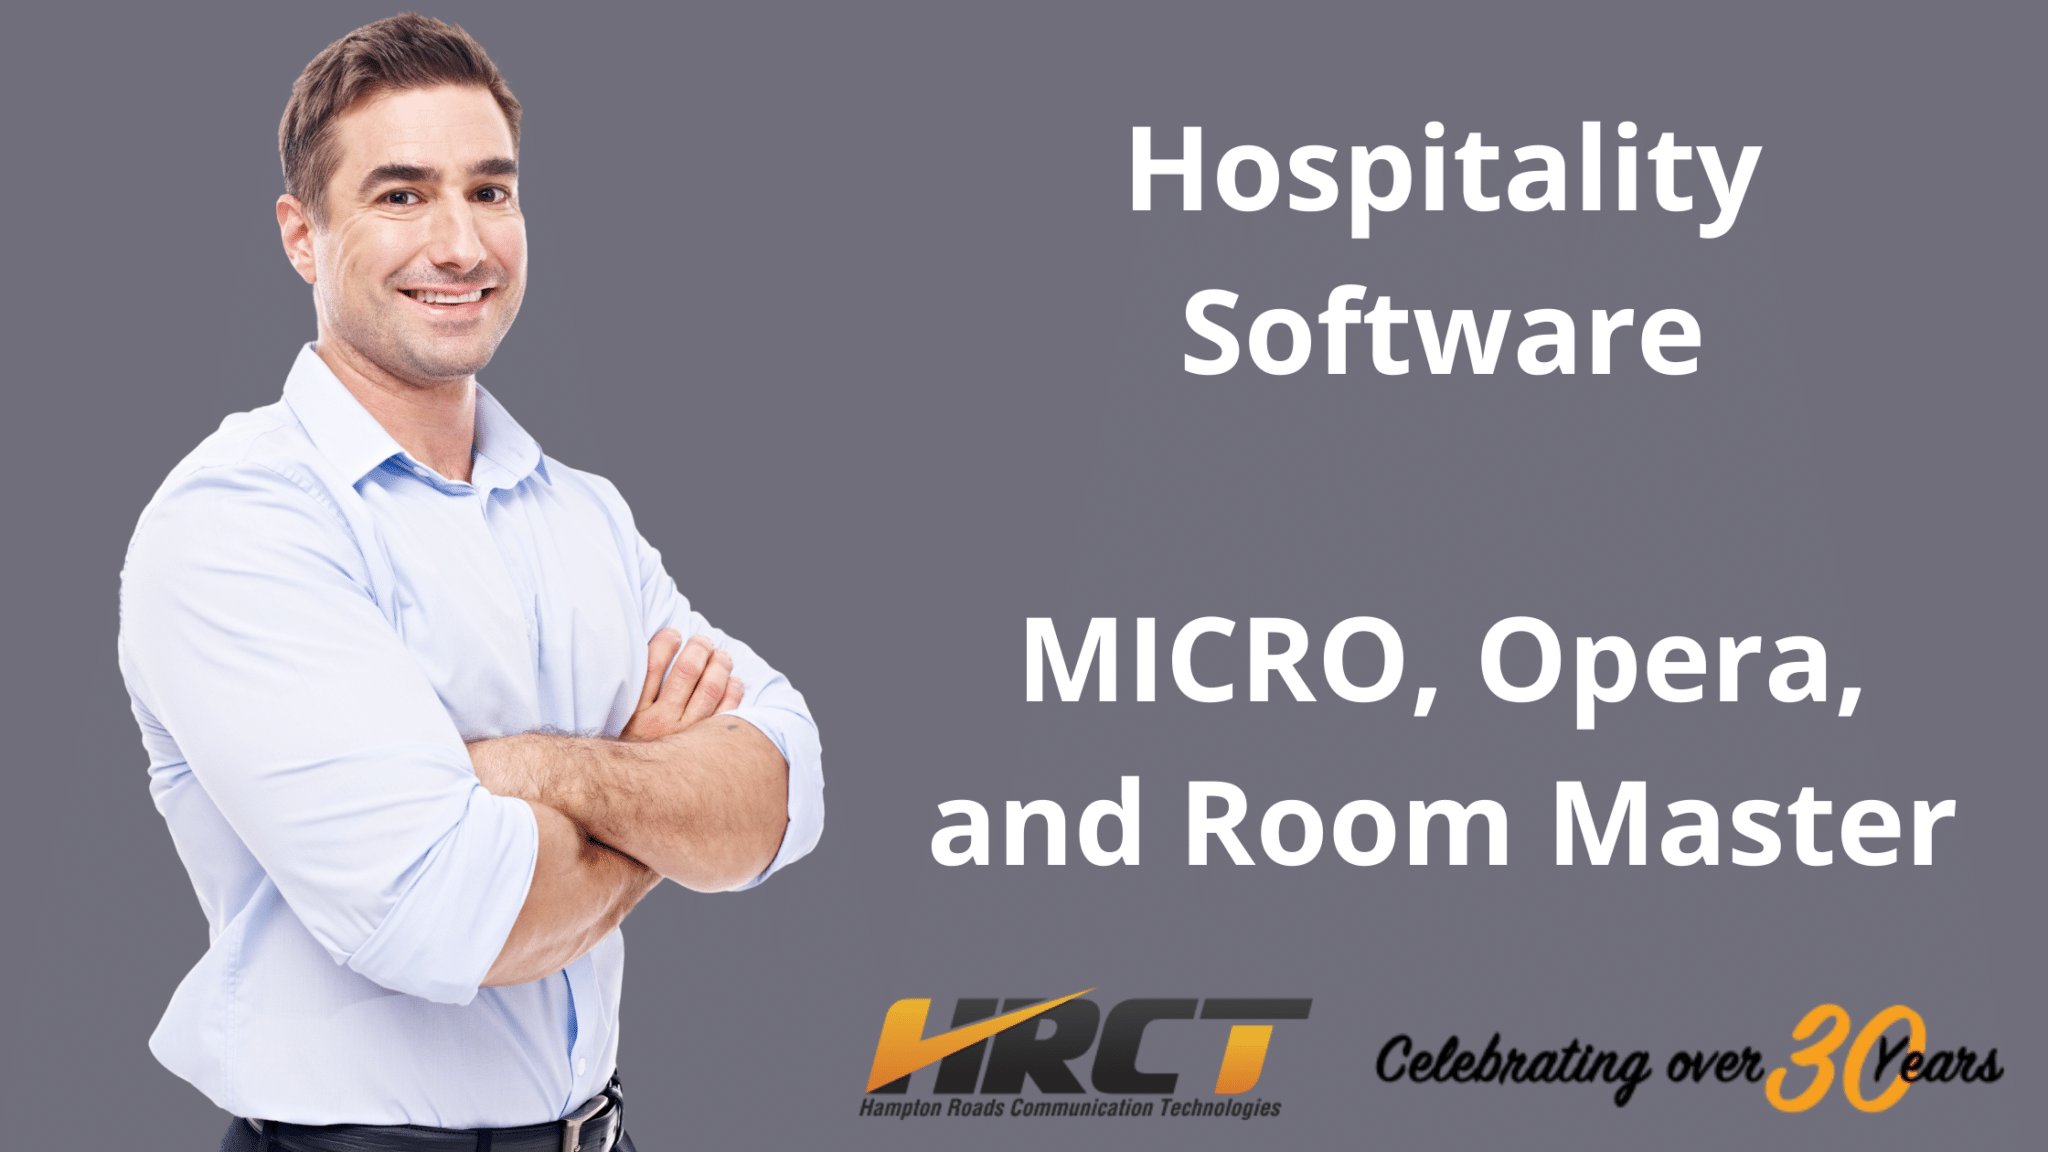 Hospitality Software MICRO, Opera, and Room Master